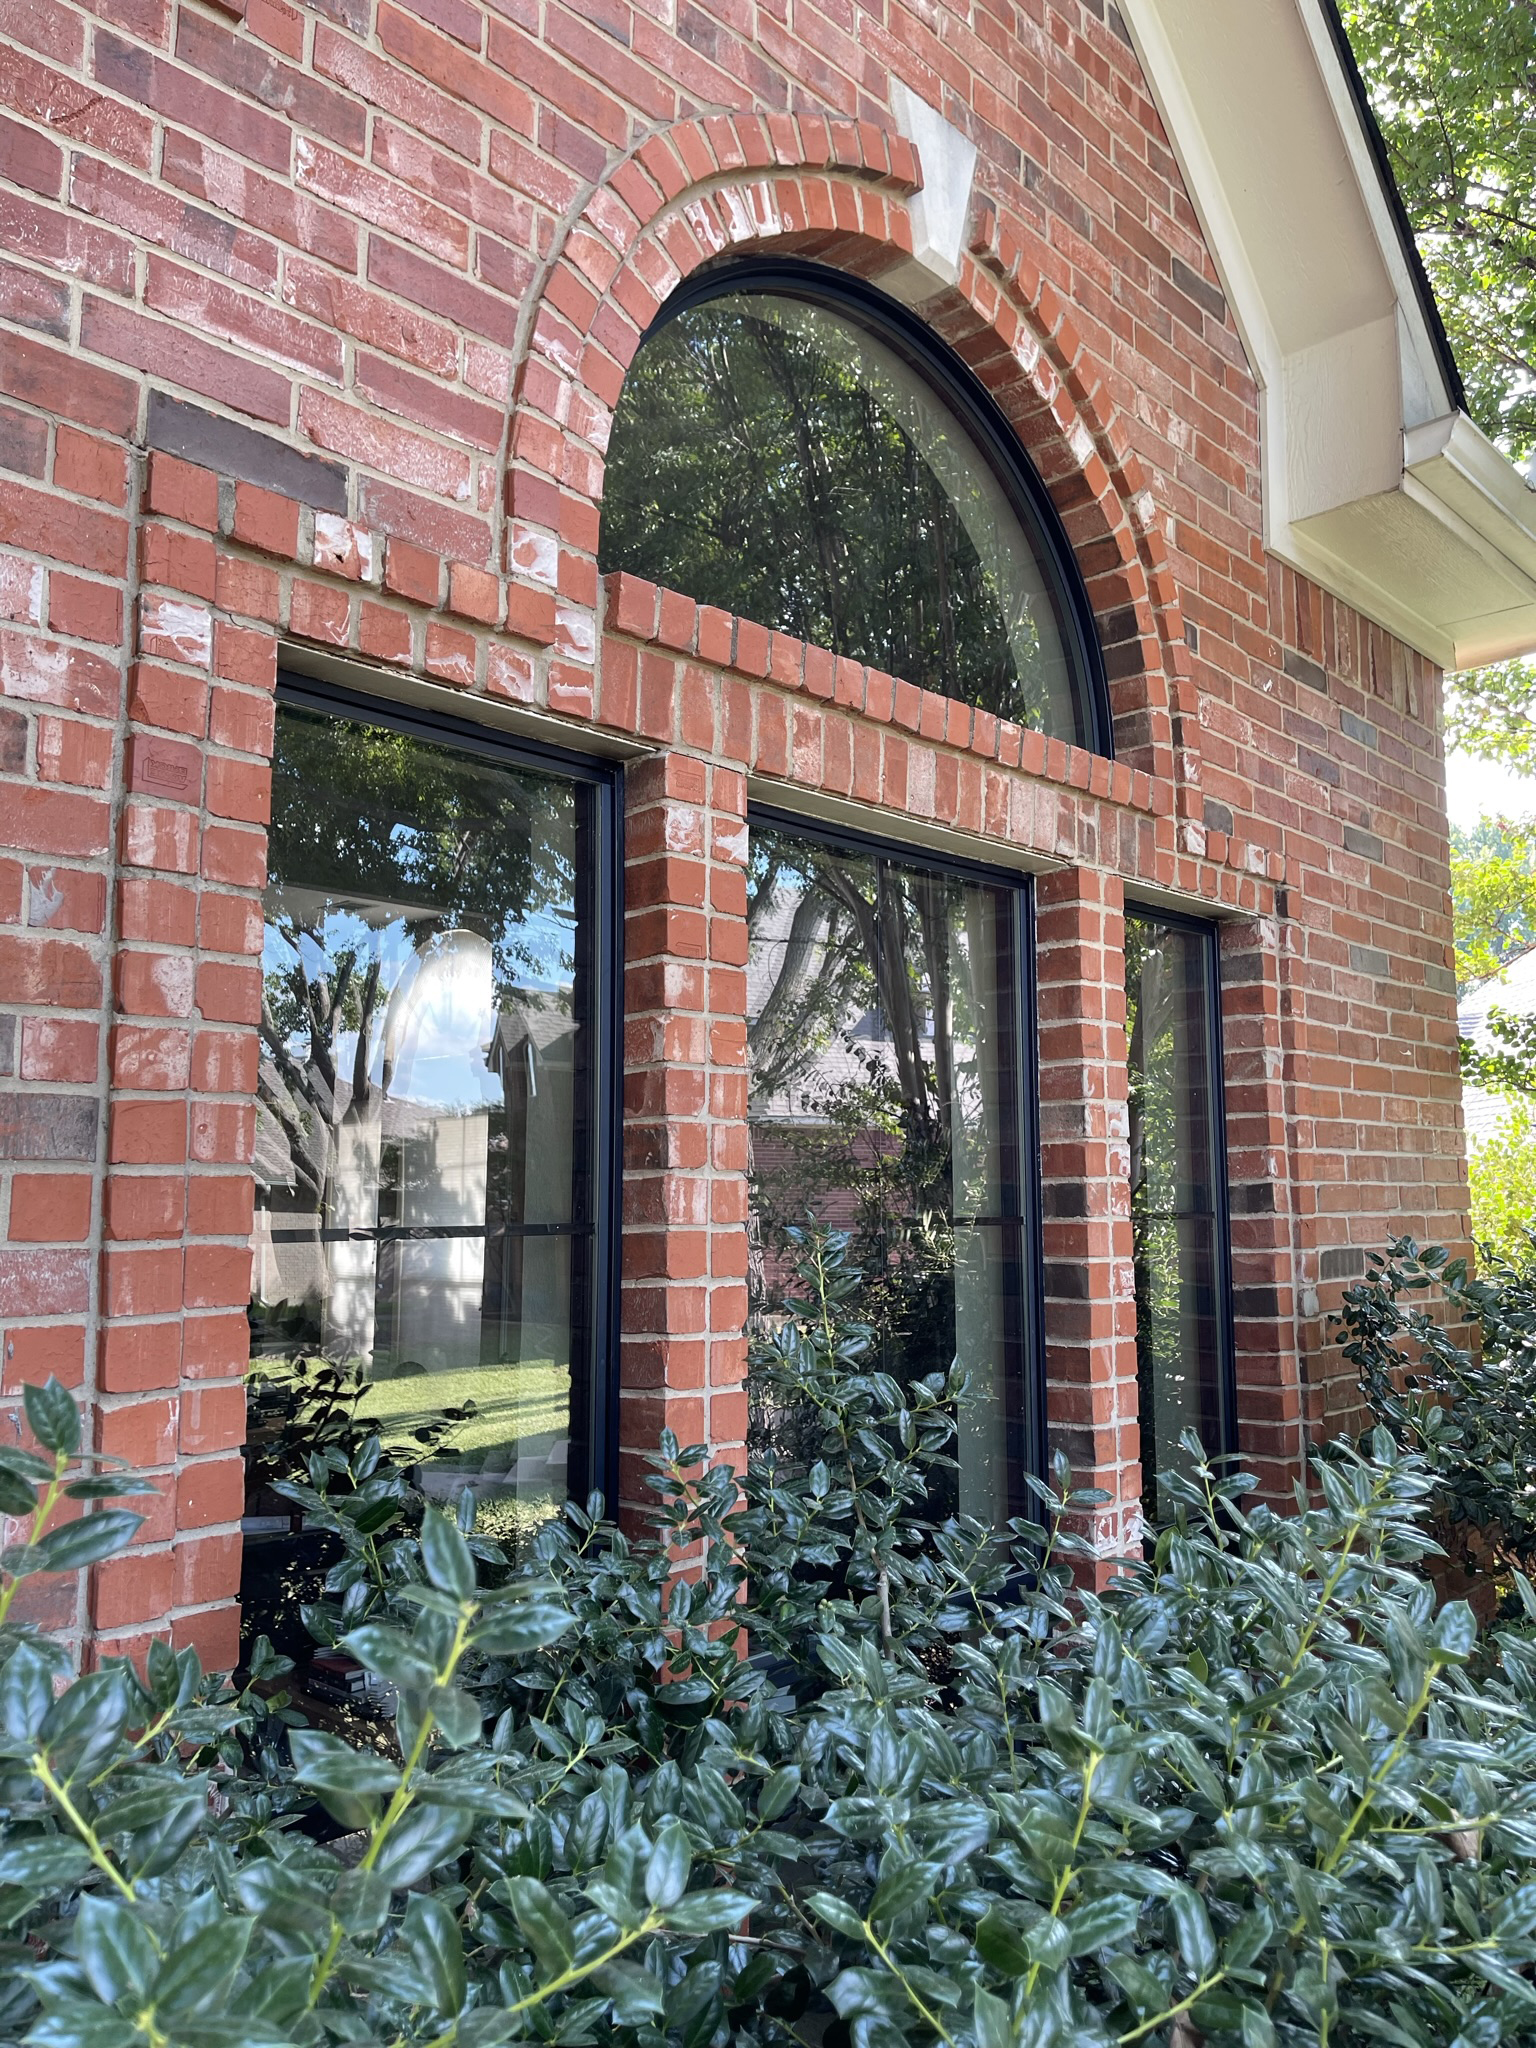 Black windows are a design favorite for remodelers and builders alike.  These AMSCO VINYL WINDOWS in black are sleek and beautiful and one of our favorites.